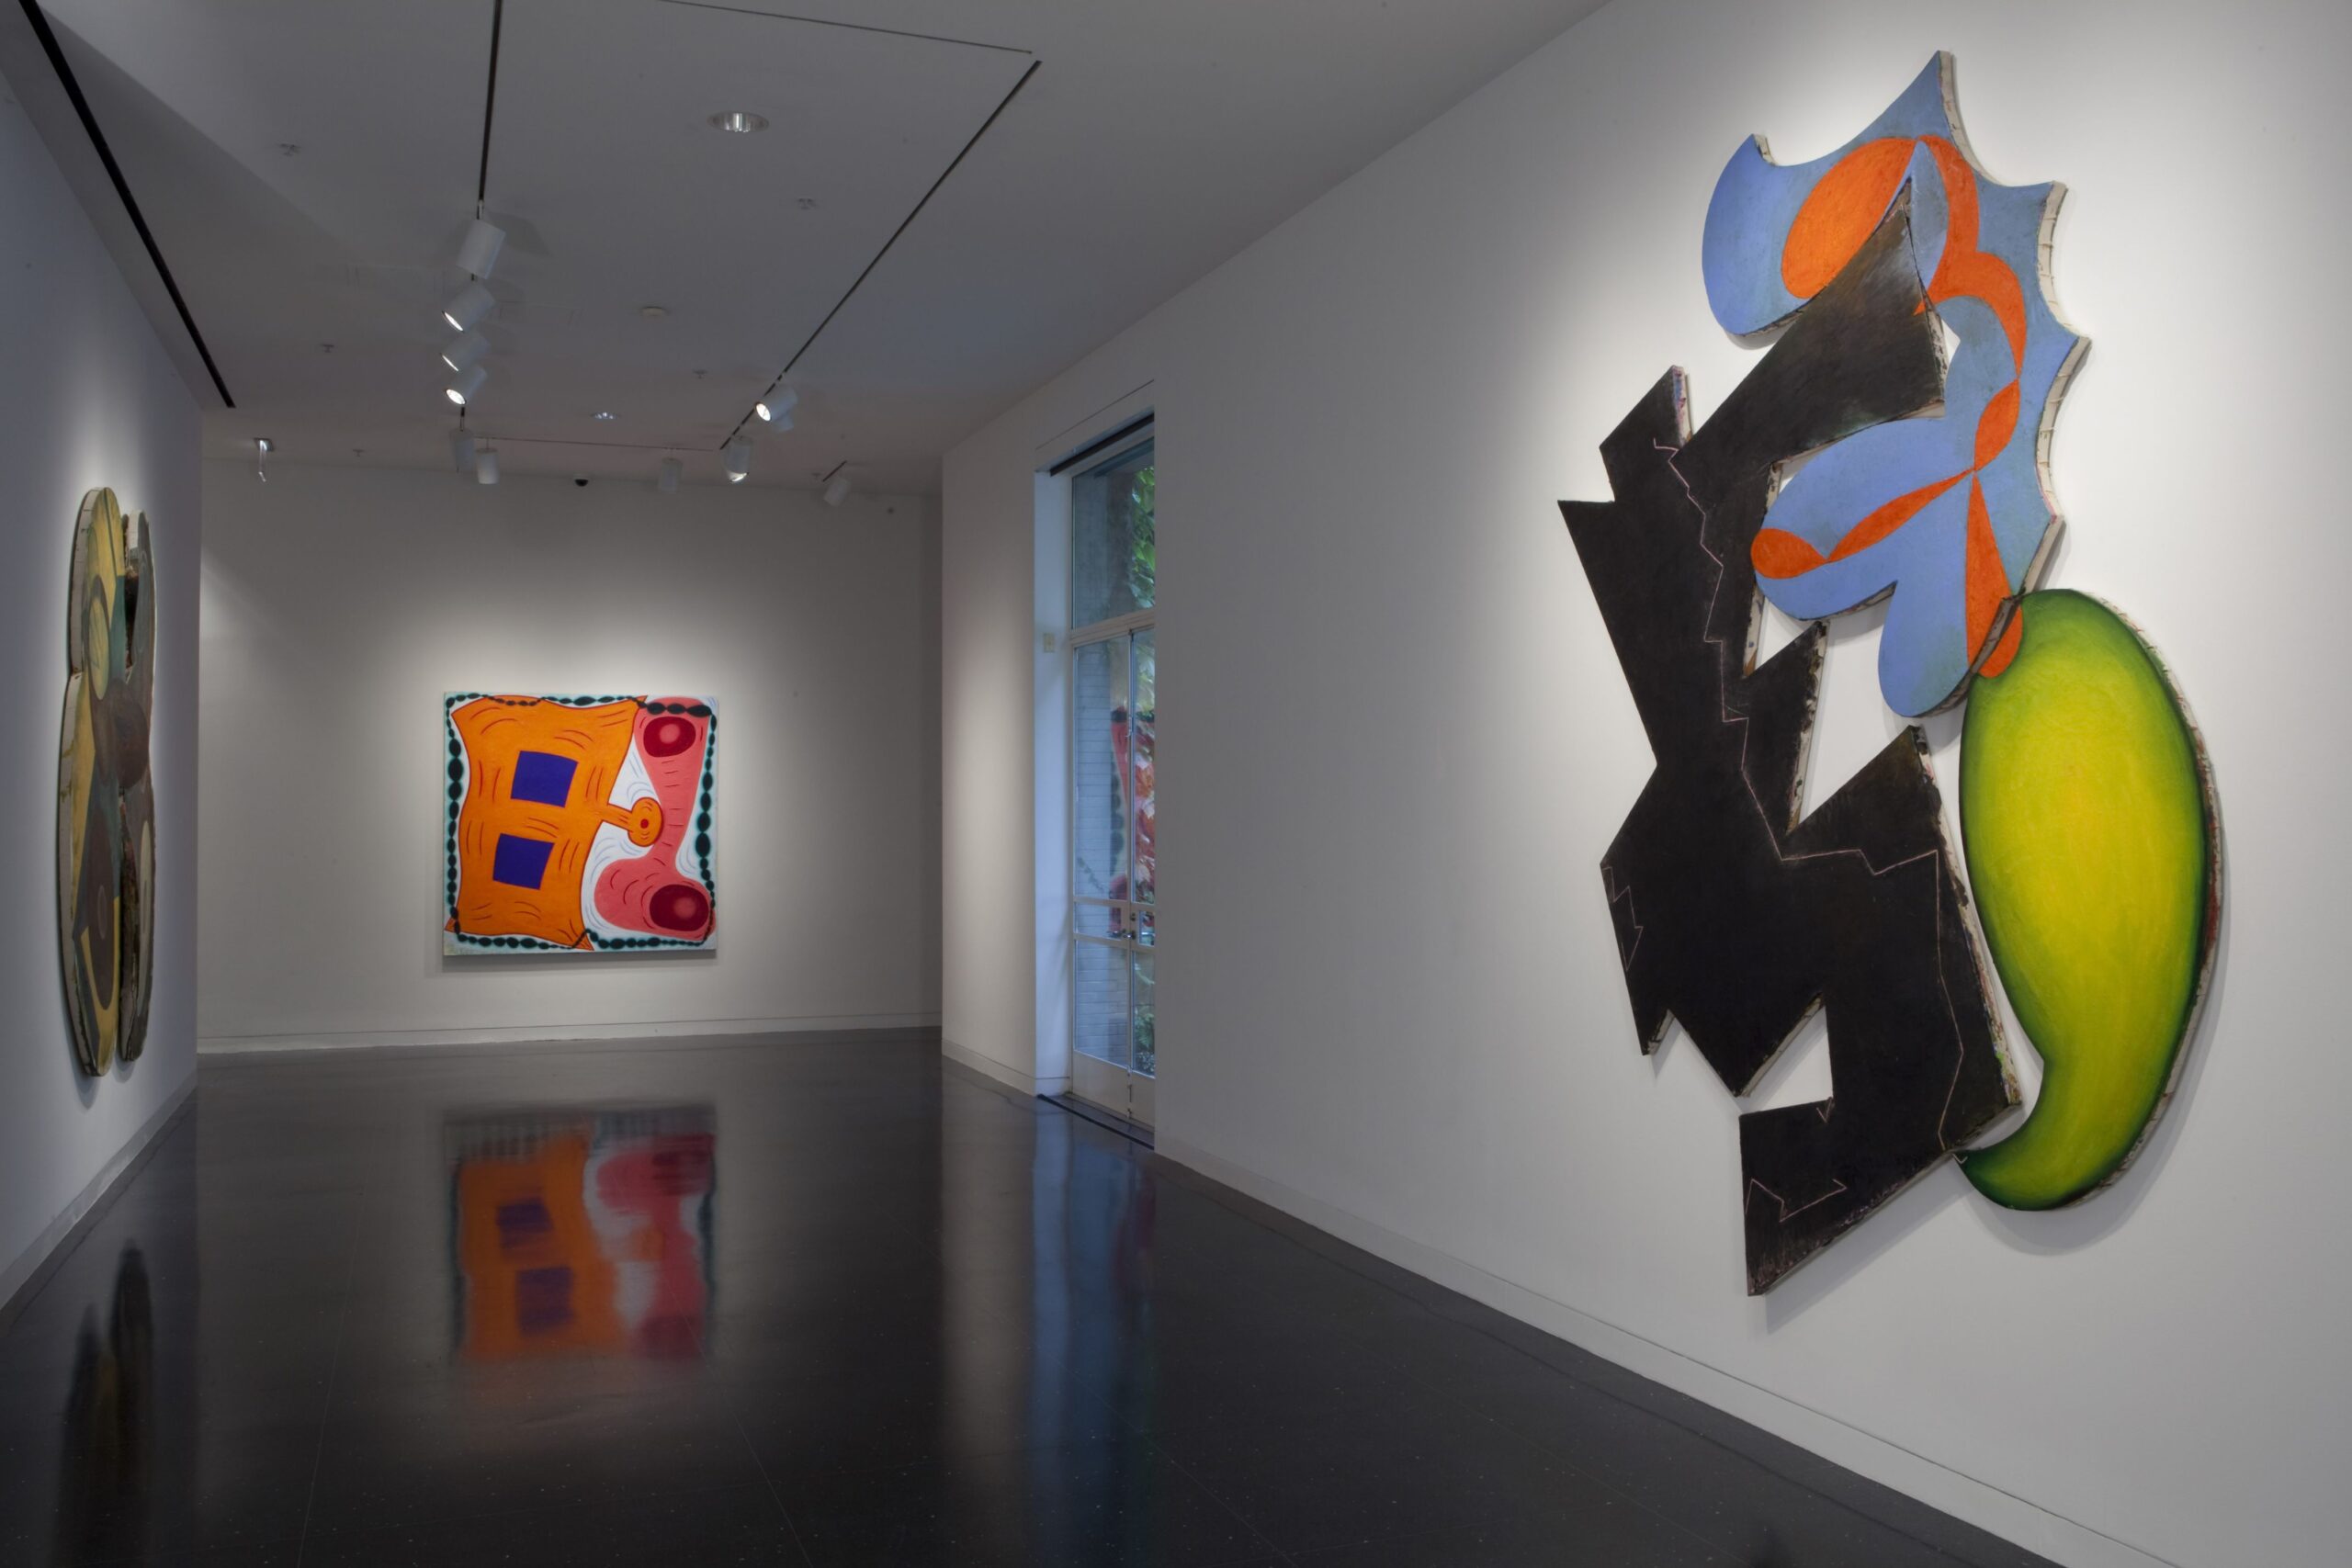 A white gallery space with two large, abstract artworks in colorful prints cut and carved into amorphous shapes. On a far wall is a large, square, mostly orange abstract painting.